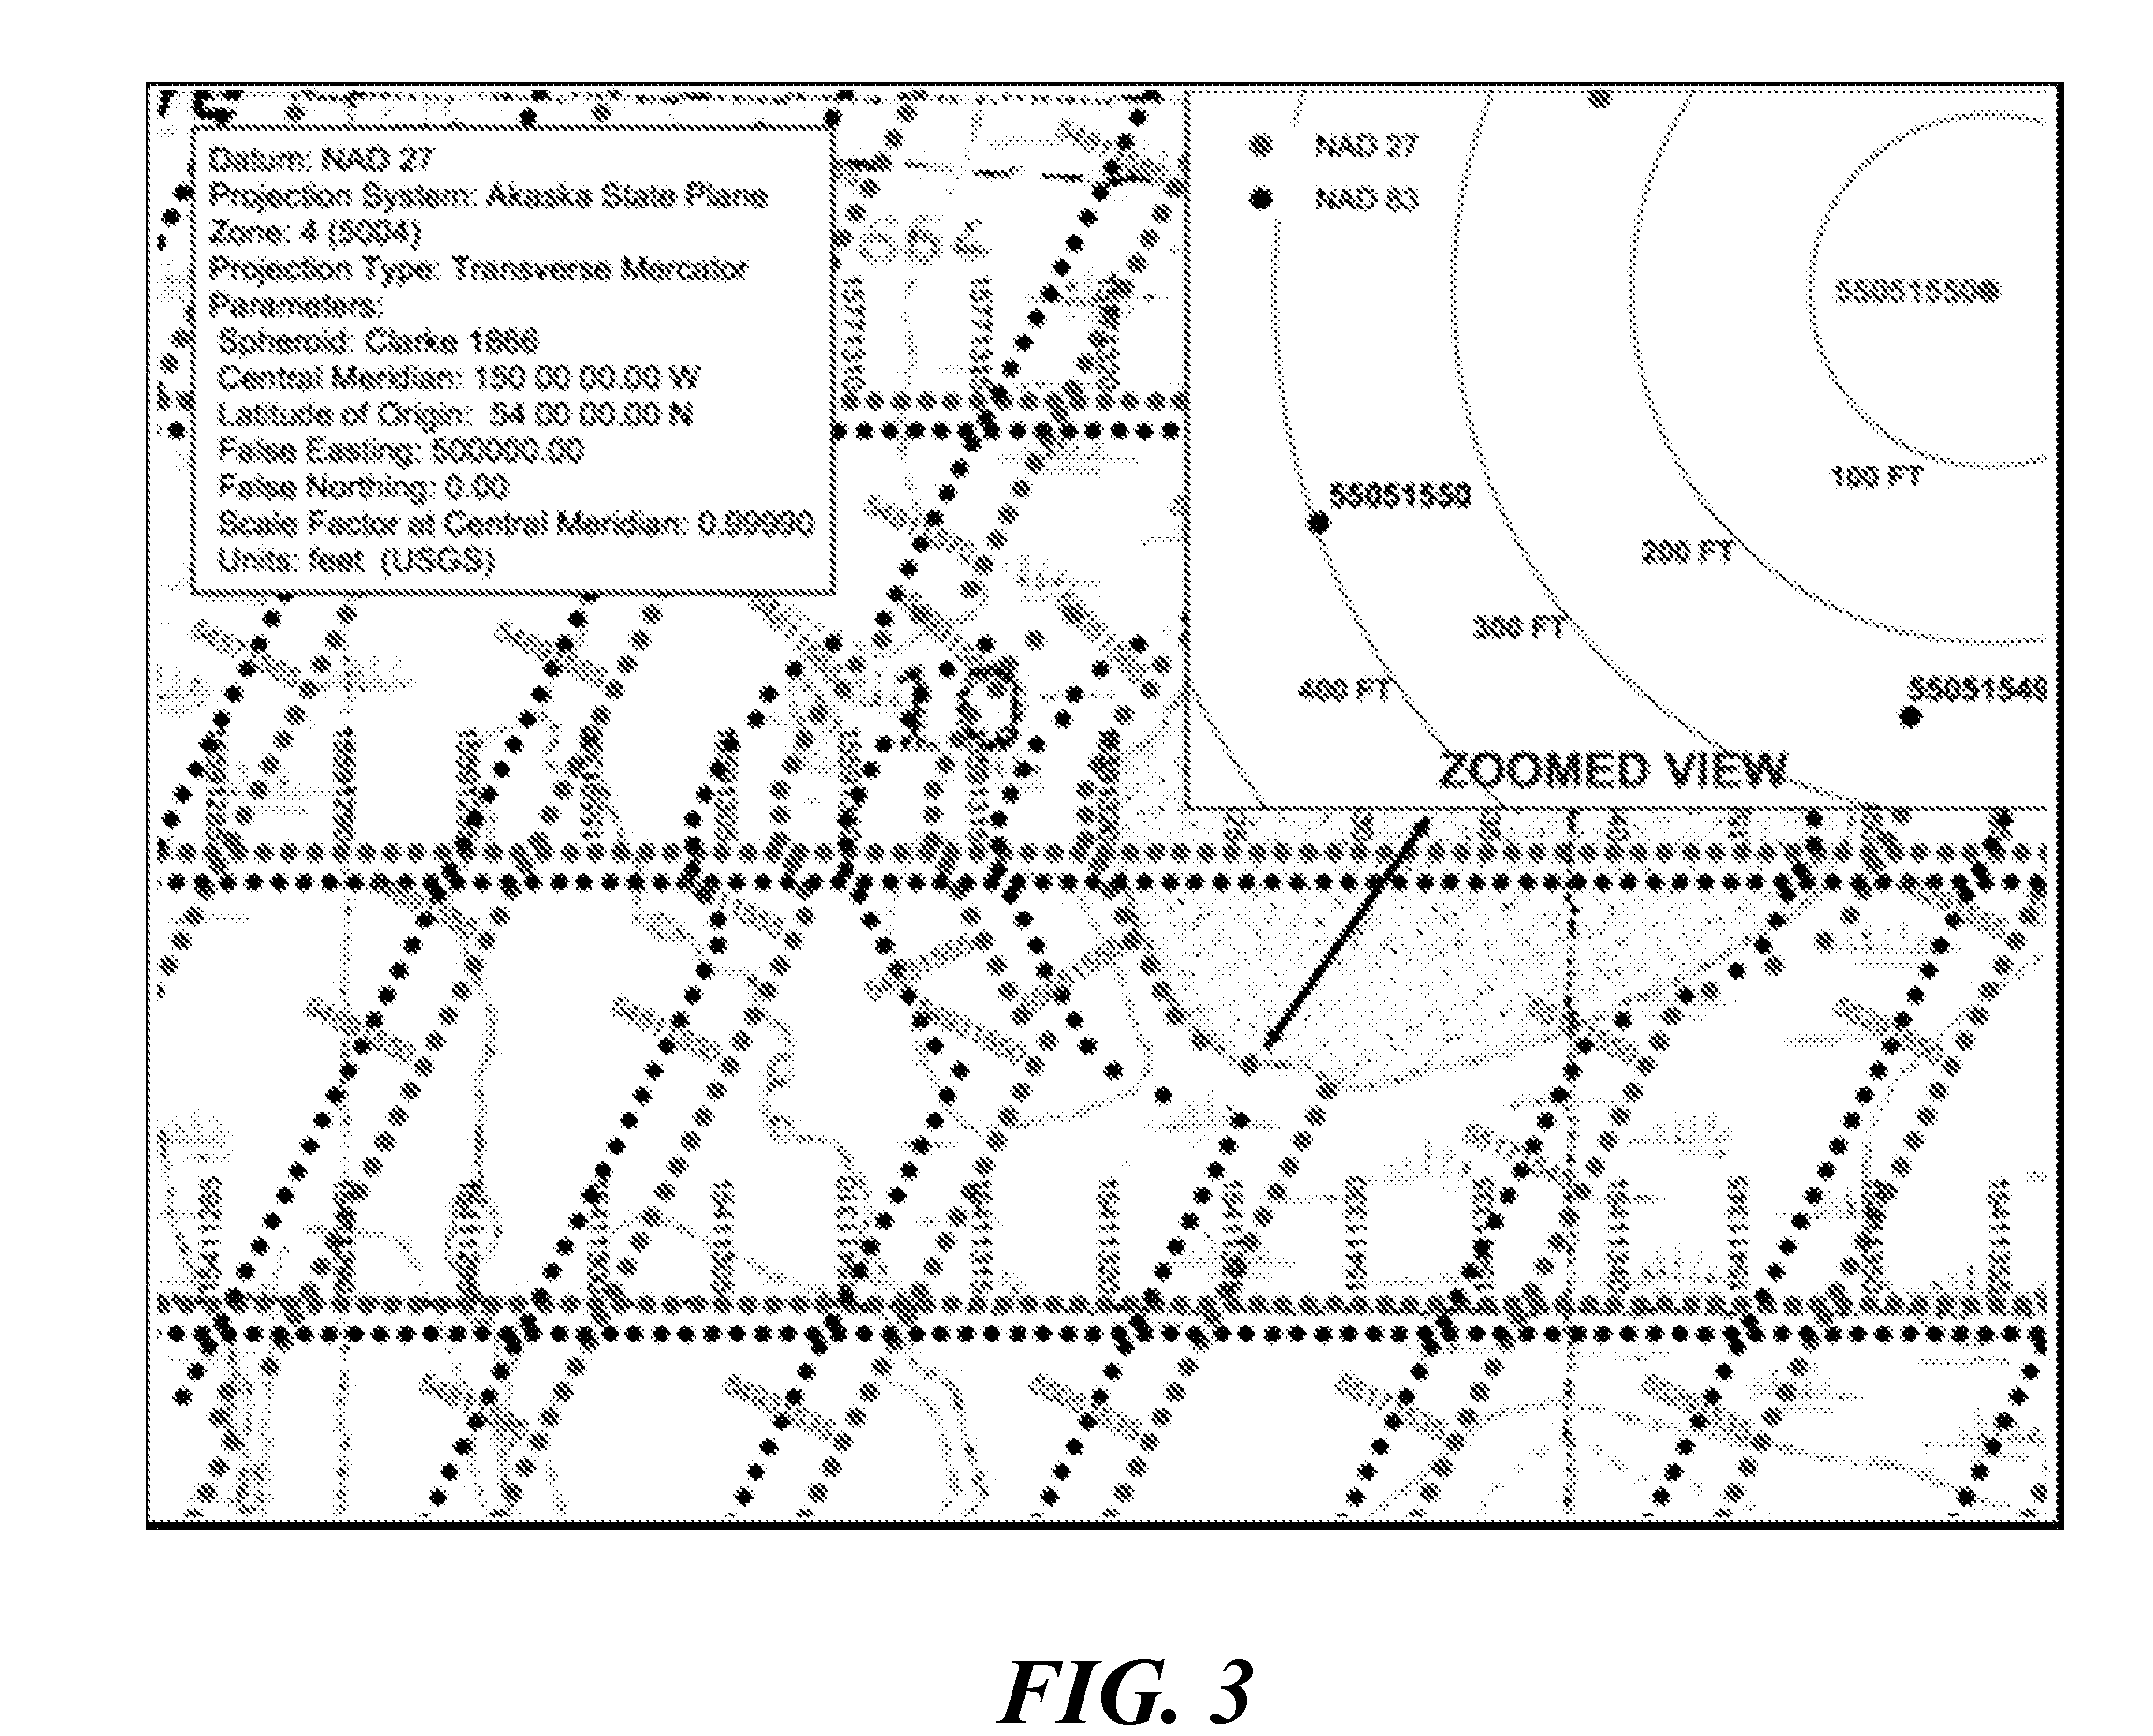 Method and computer program product for geophysical and geologic data identification, geodetic classification, and organization